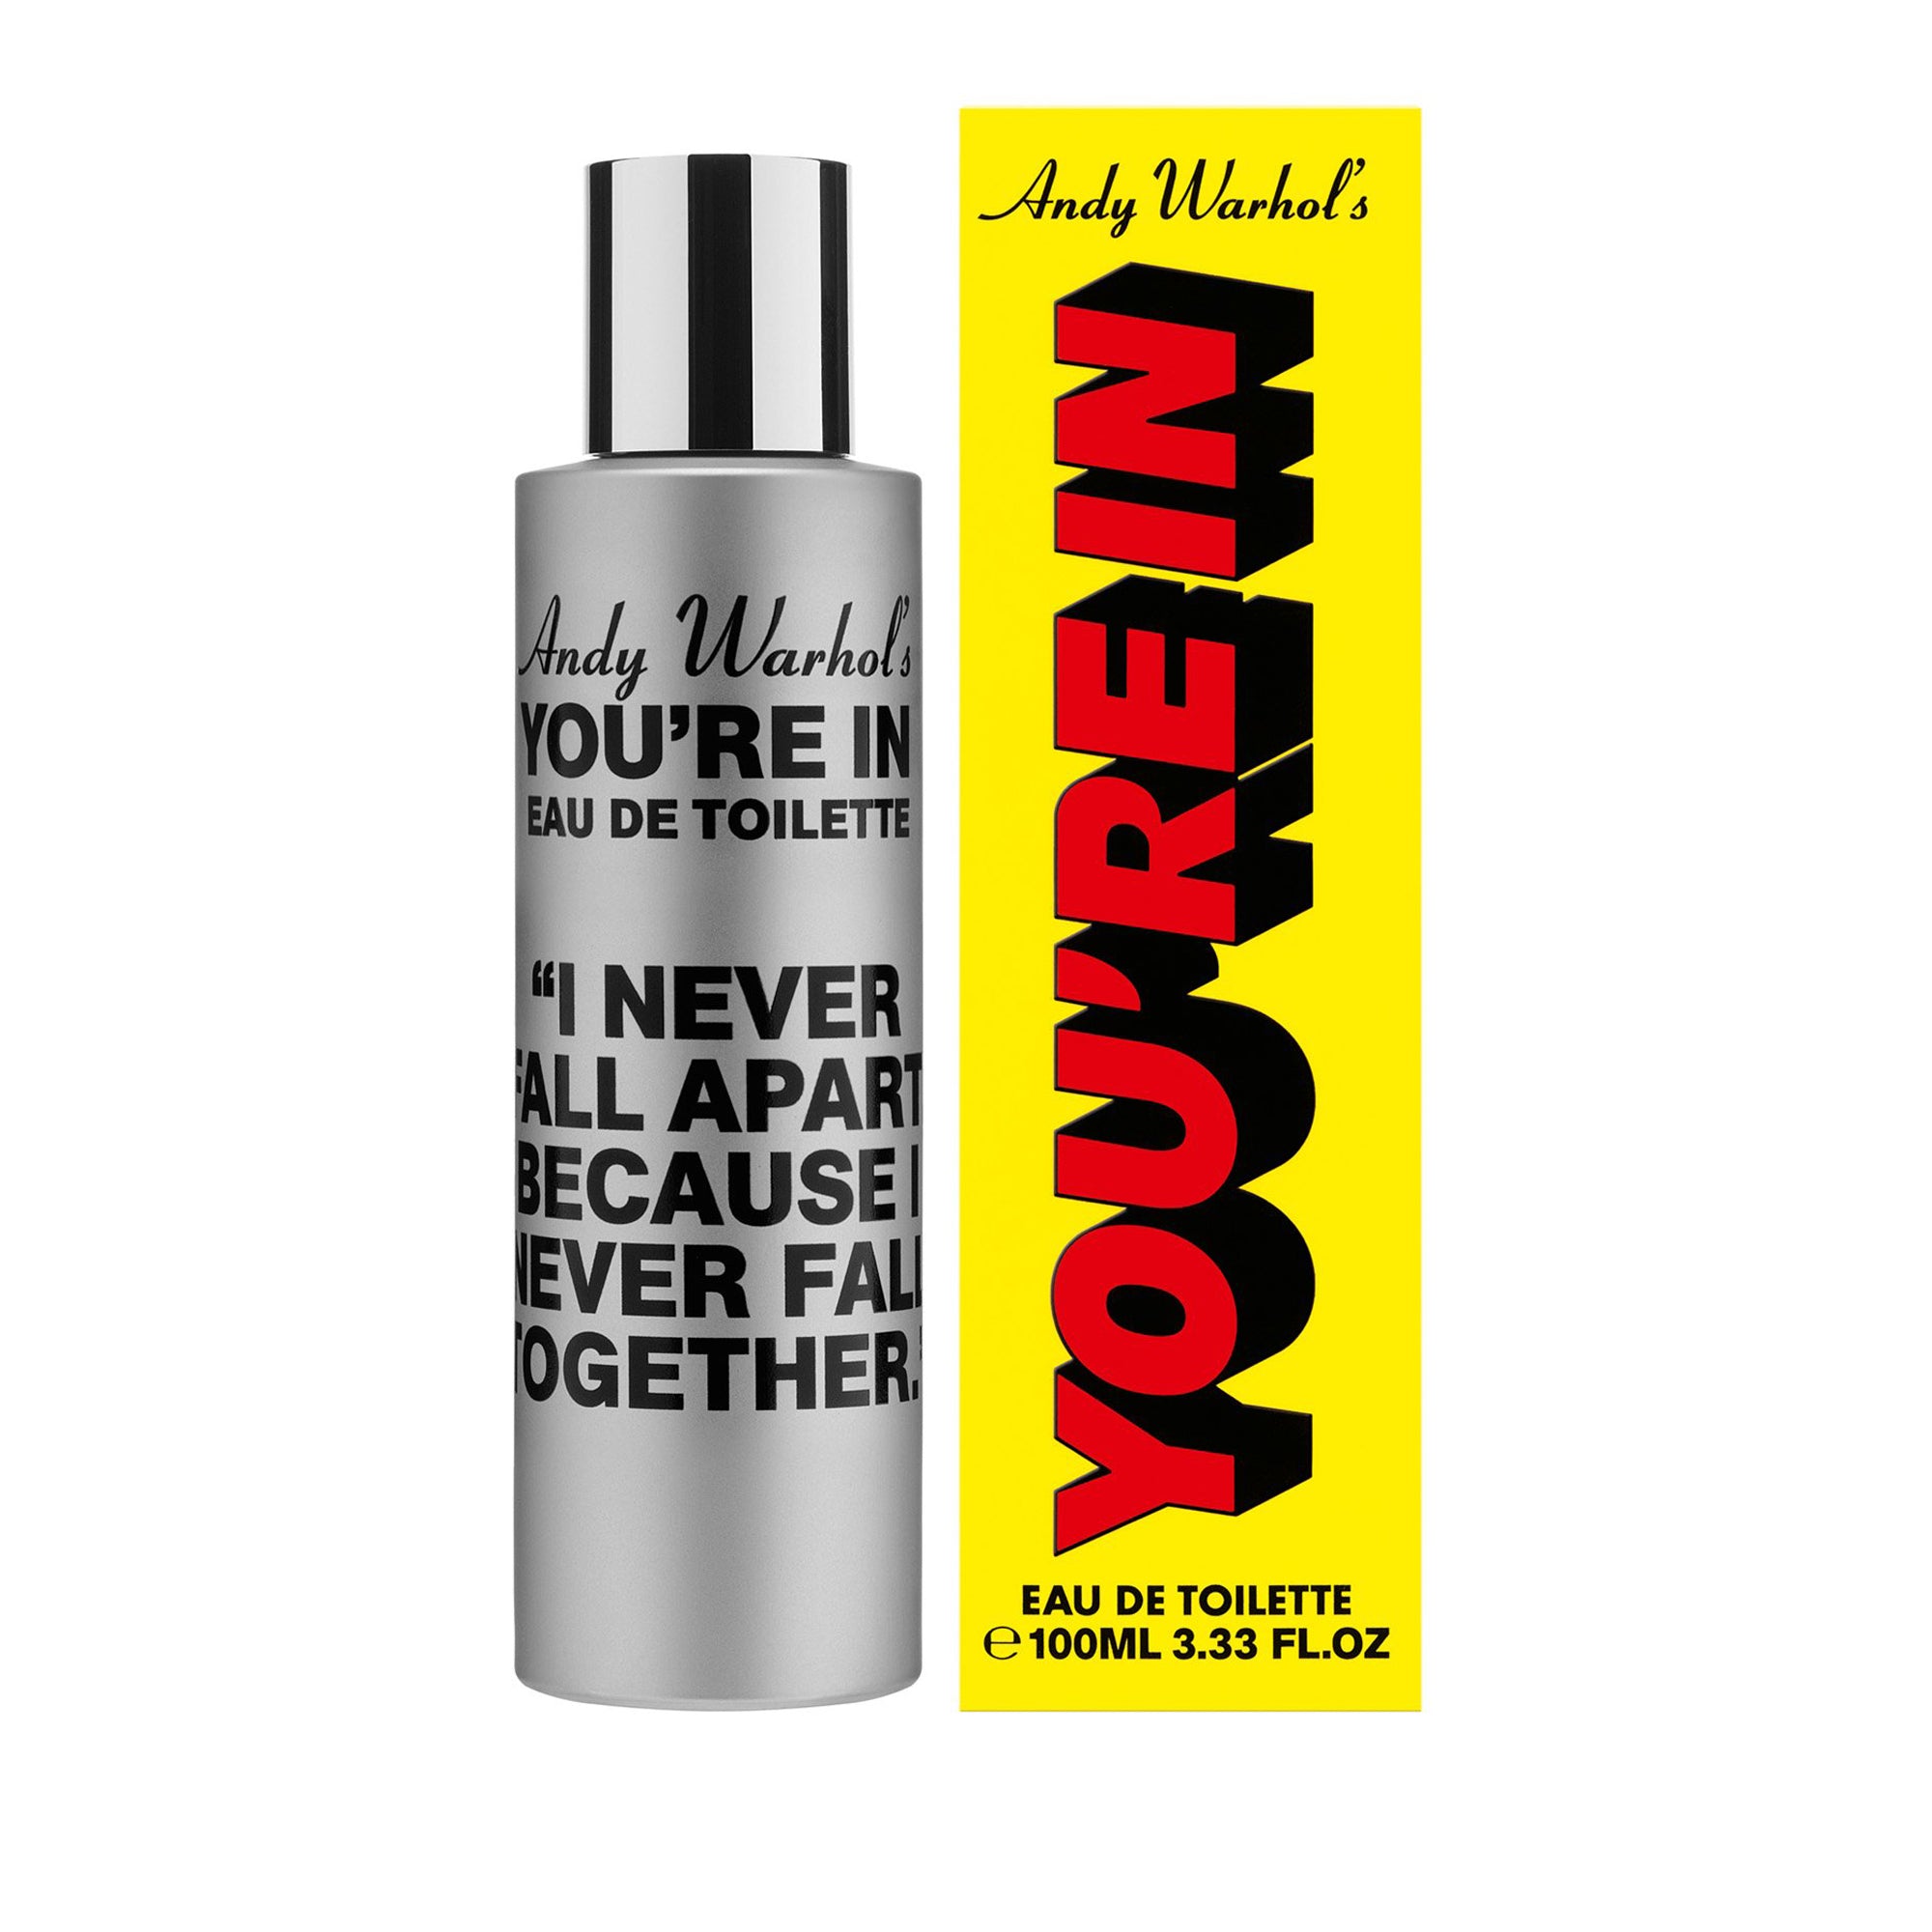 CDG PARFUM - "Andy Warhol's You're In" 100ml - (FALL APART) view 2